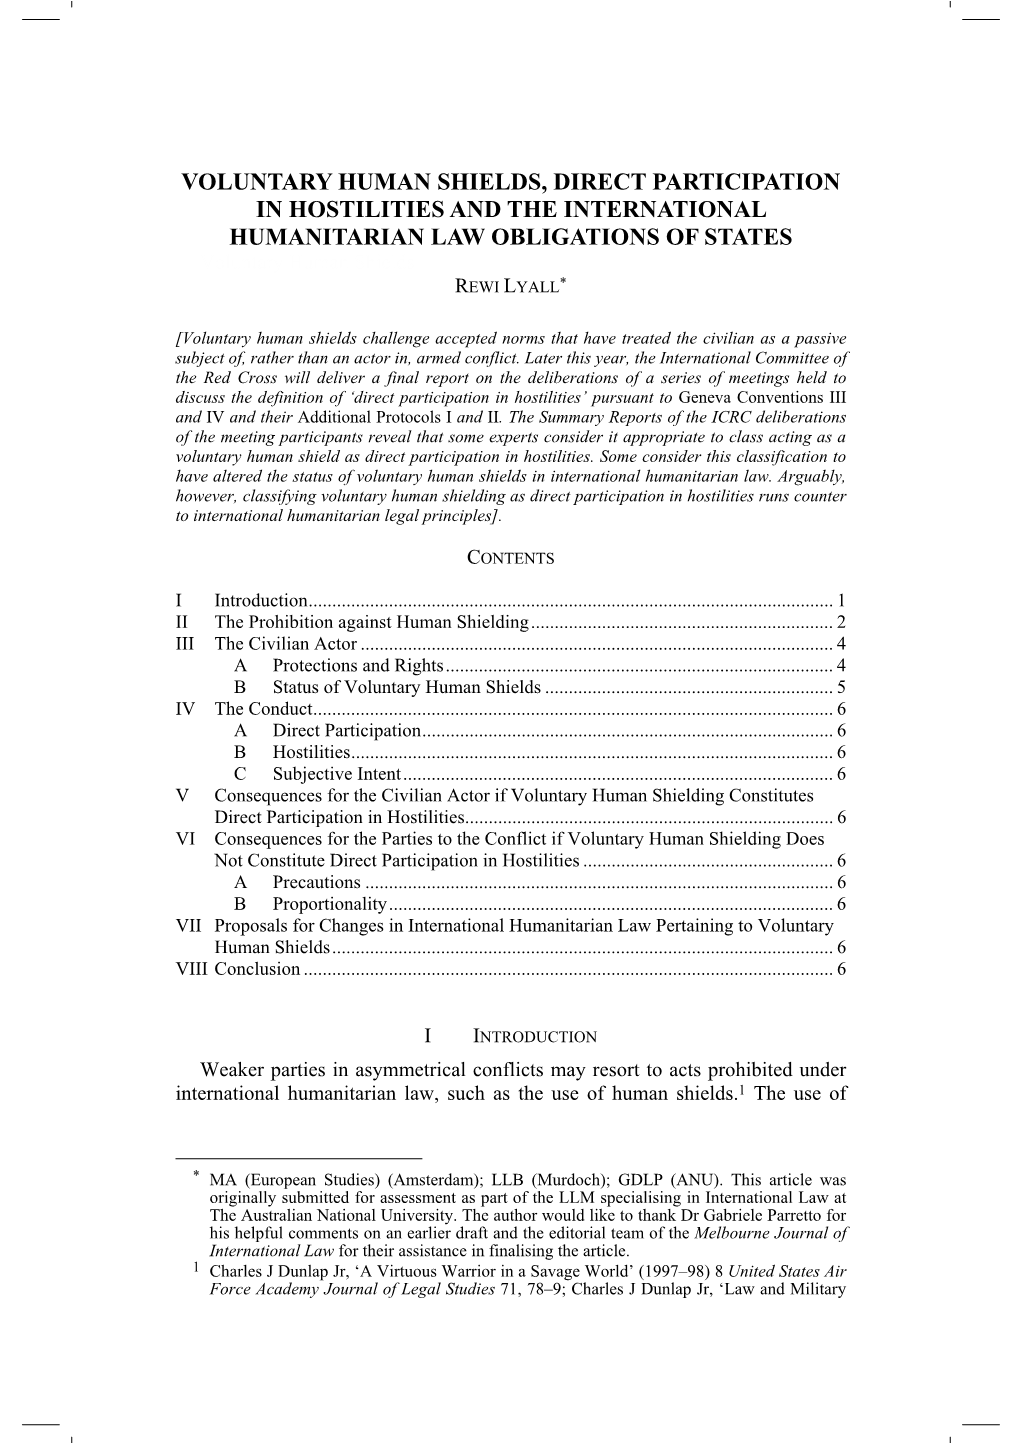 VOLUNTARY HUMAN SHIELDS, DIRECT PARTICIPATION in HOSTILITIES and the INTERNATIONAL HUMANITARIAN LAW OBLIGATIONS of STATES Voluntary Human Shields REWI LYALL*